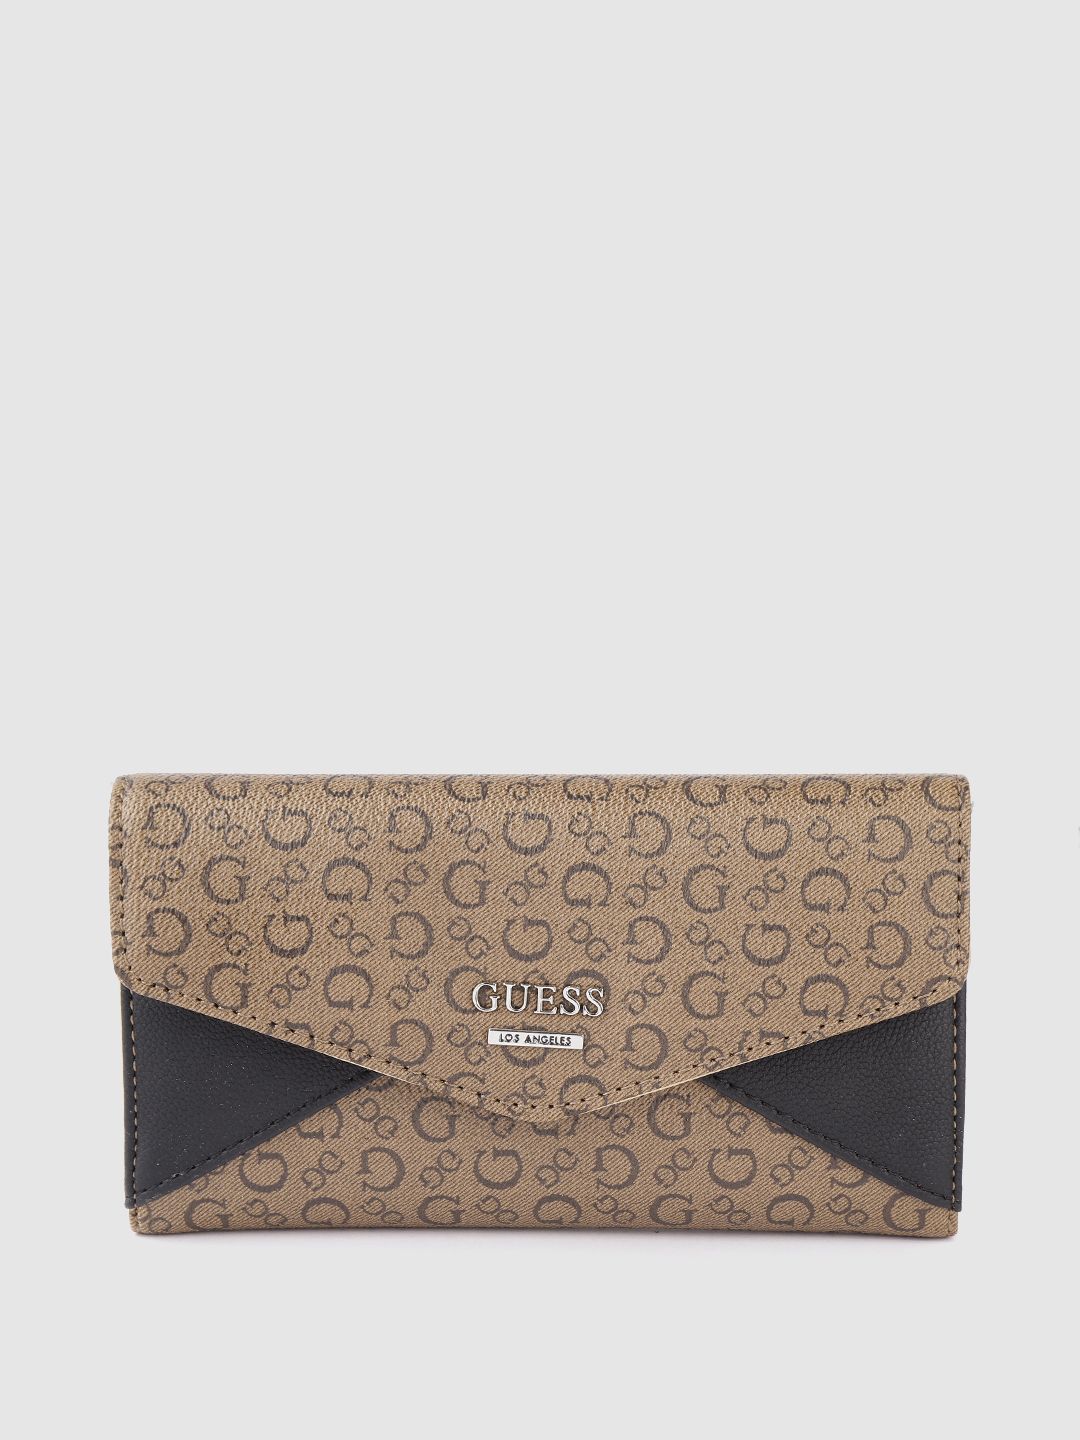 GUESS Women Brown & Black Typography Printed PU Three Fold Wallet Price in India